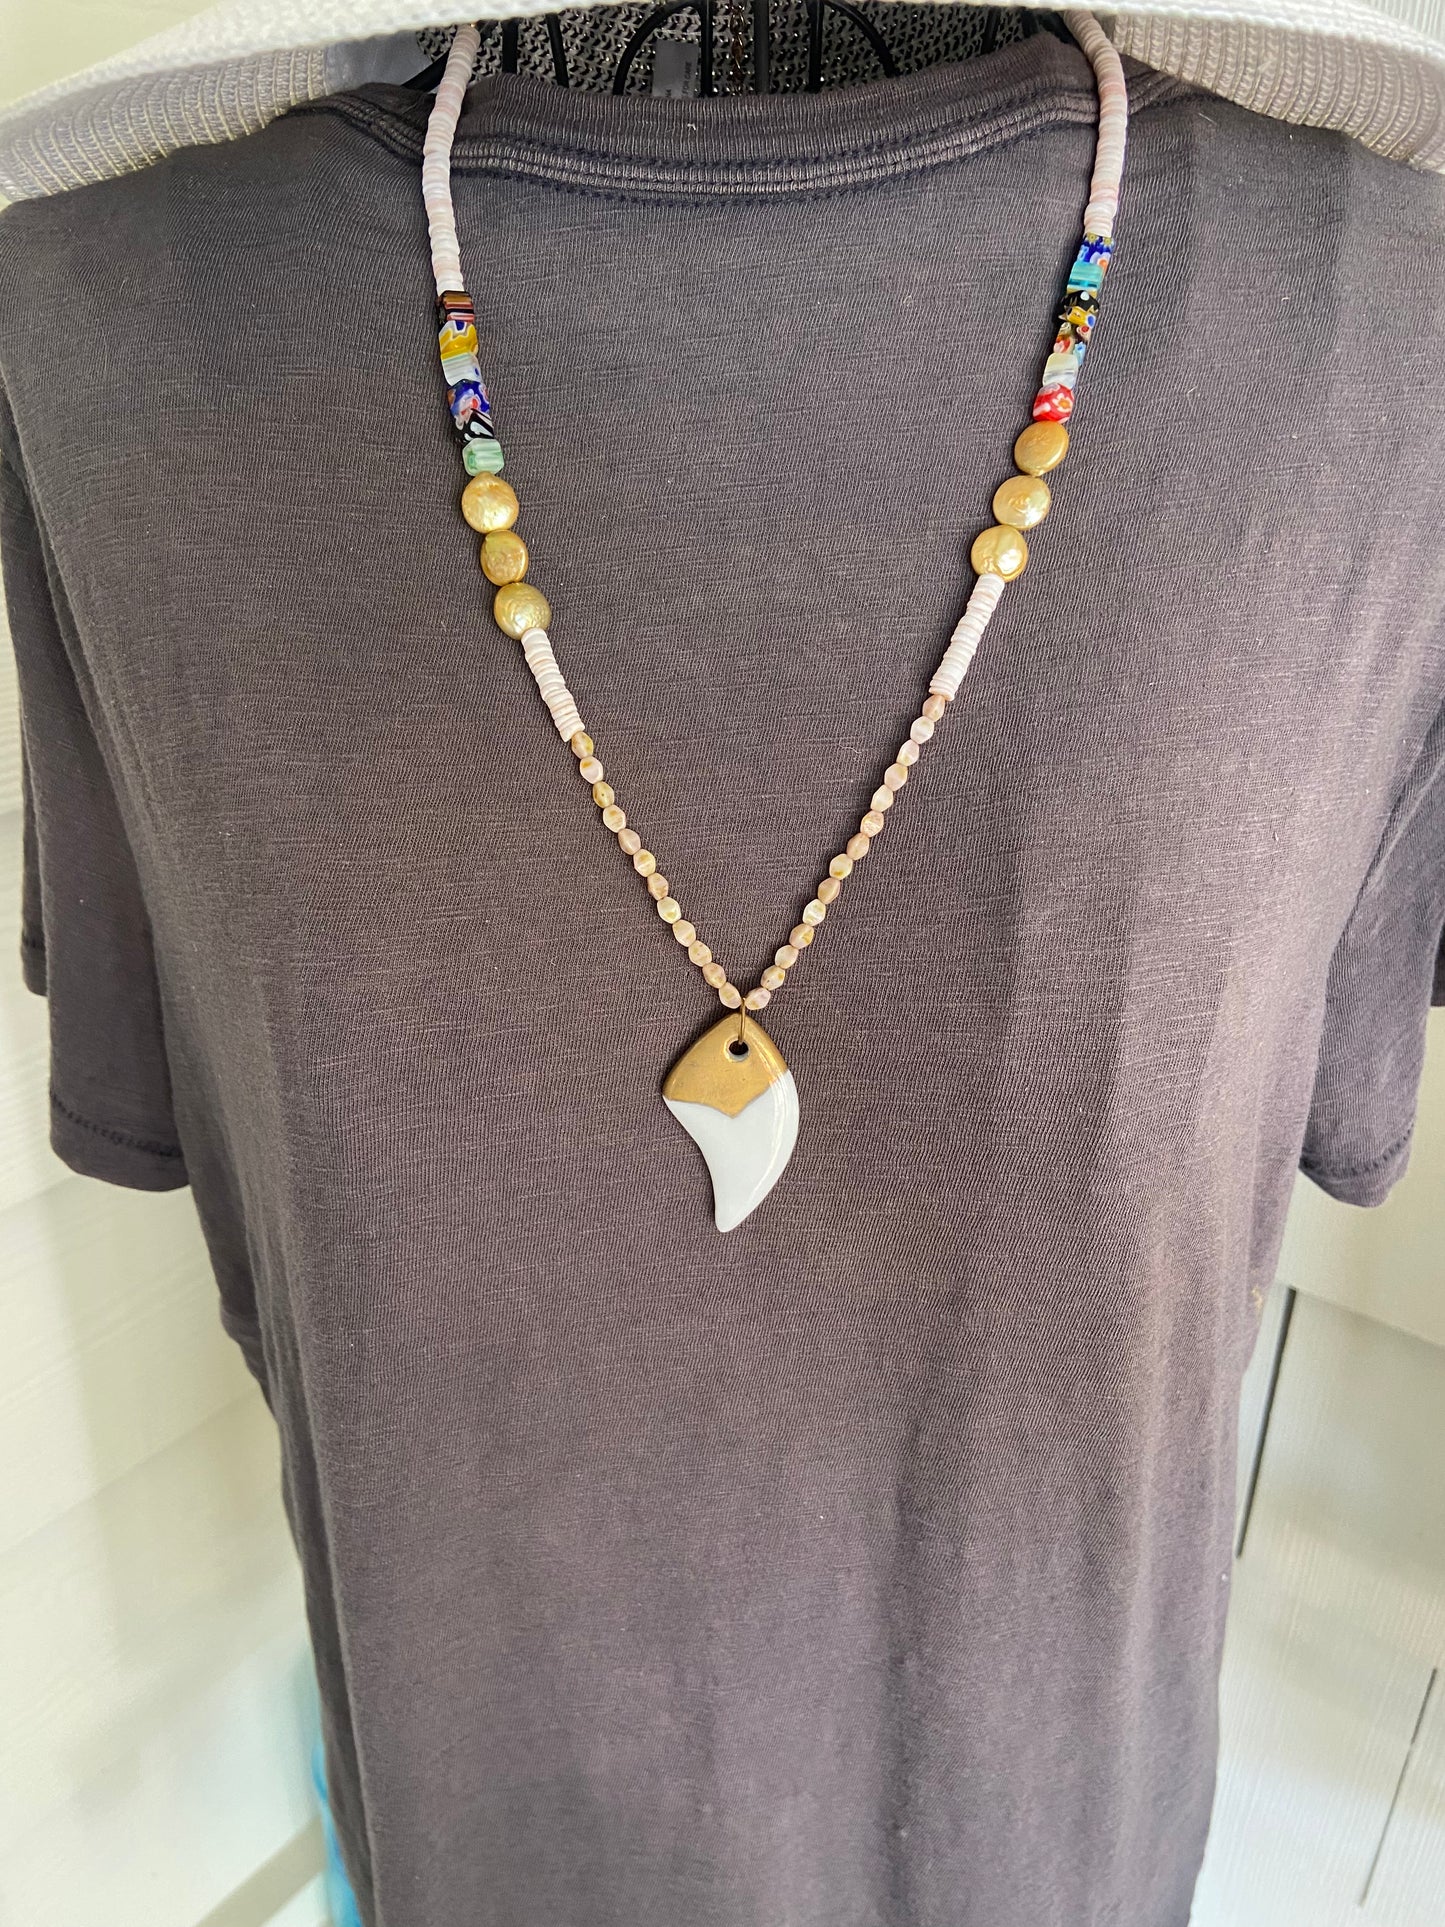 A gift, gift for mom, Coastal multi colored Necklace